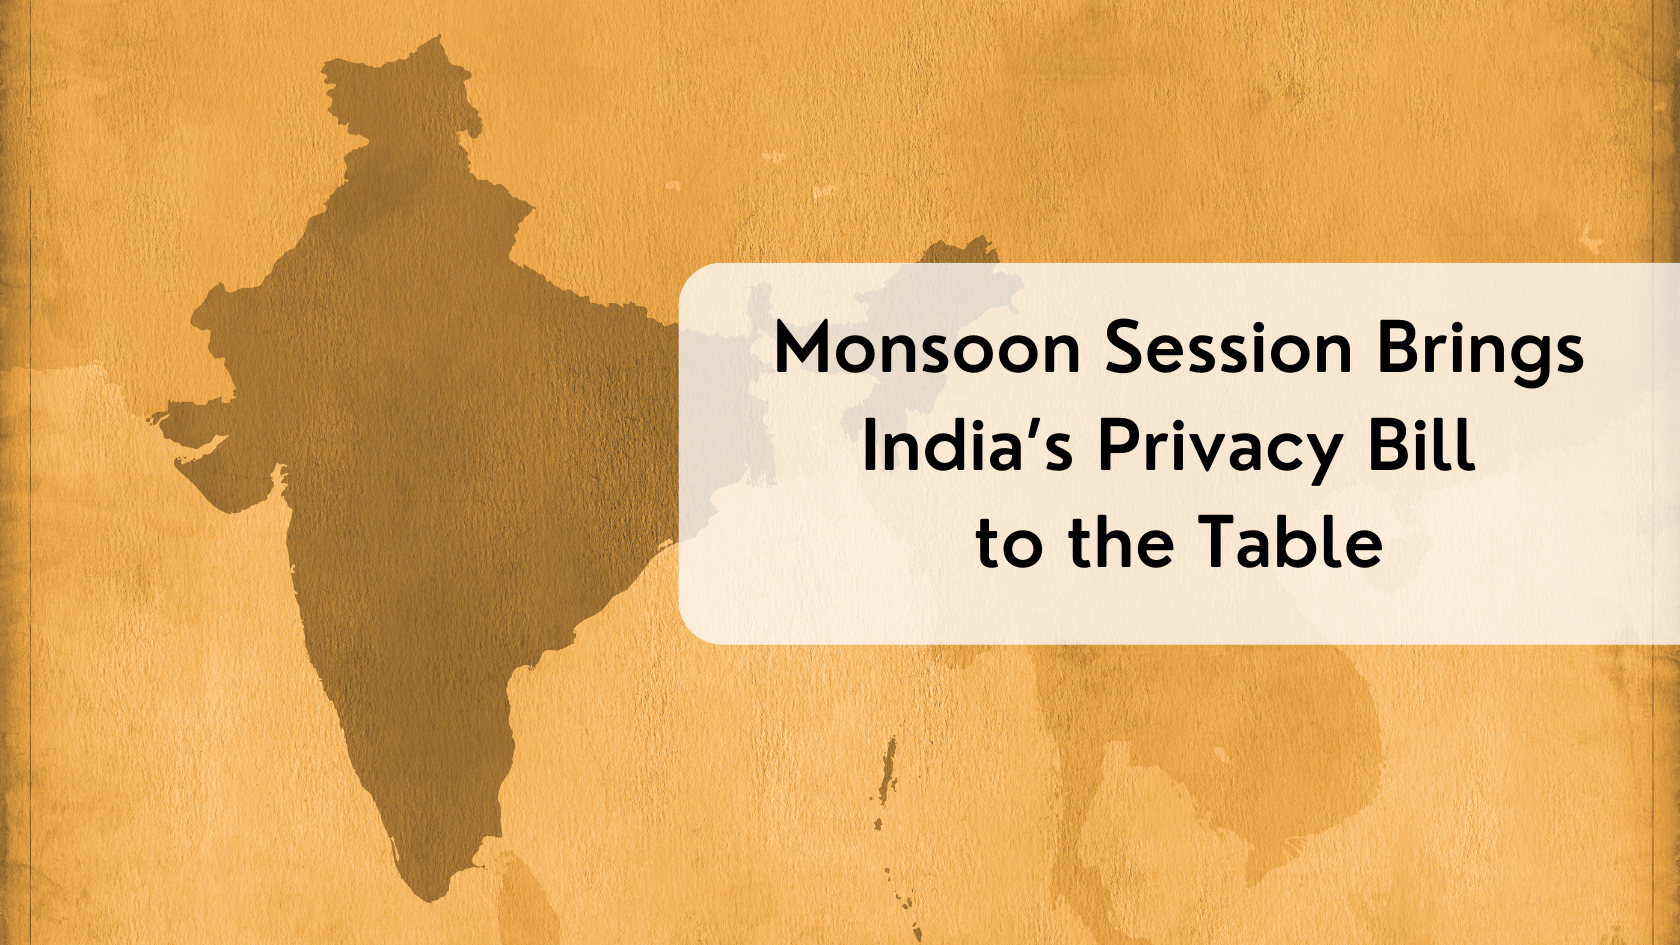 Monsoon Season Brings India’s Privacy Bill to the Table